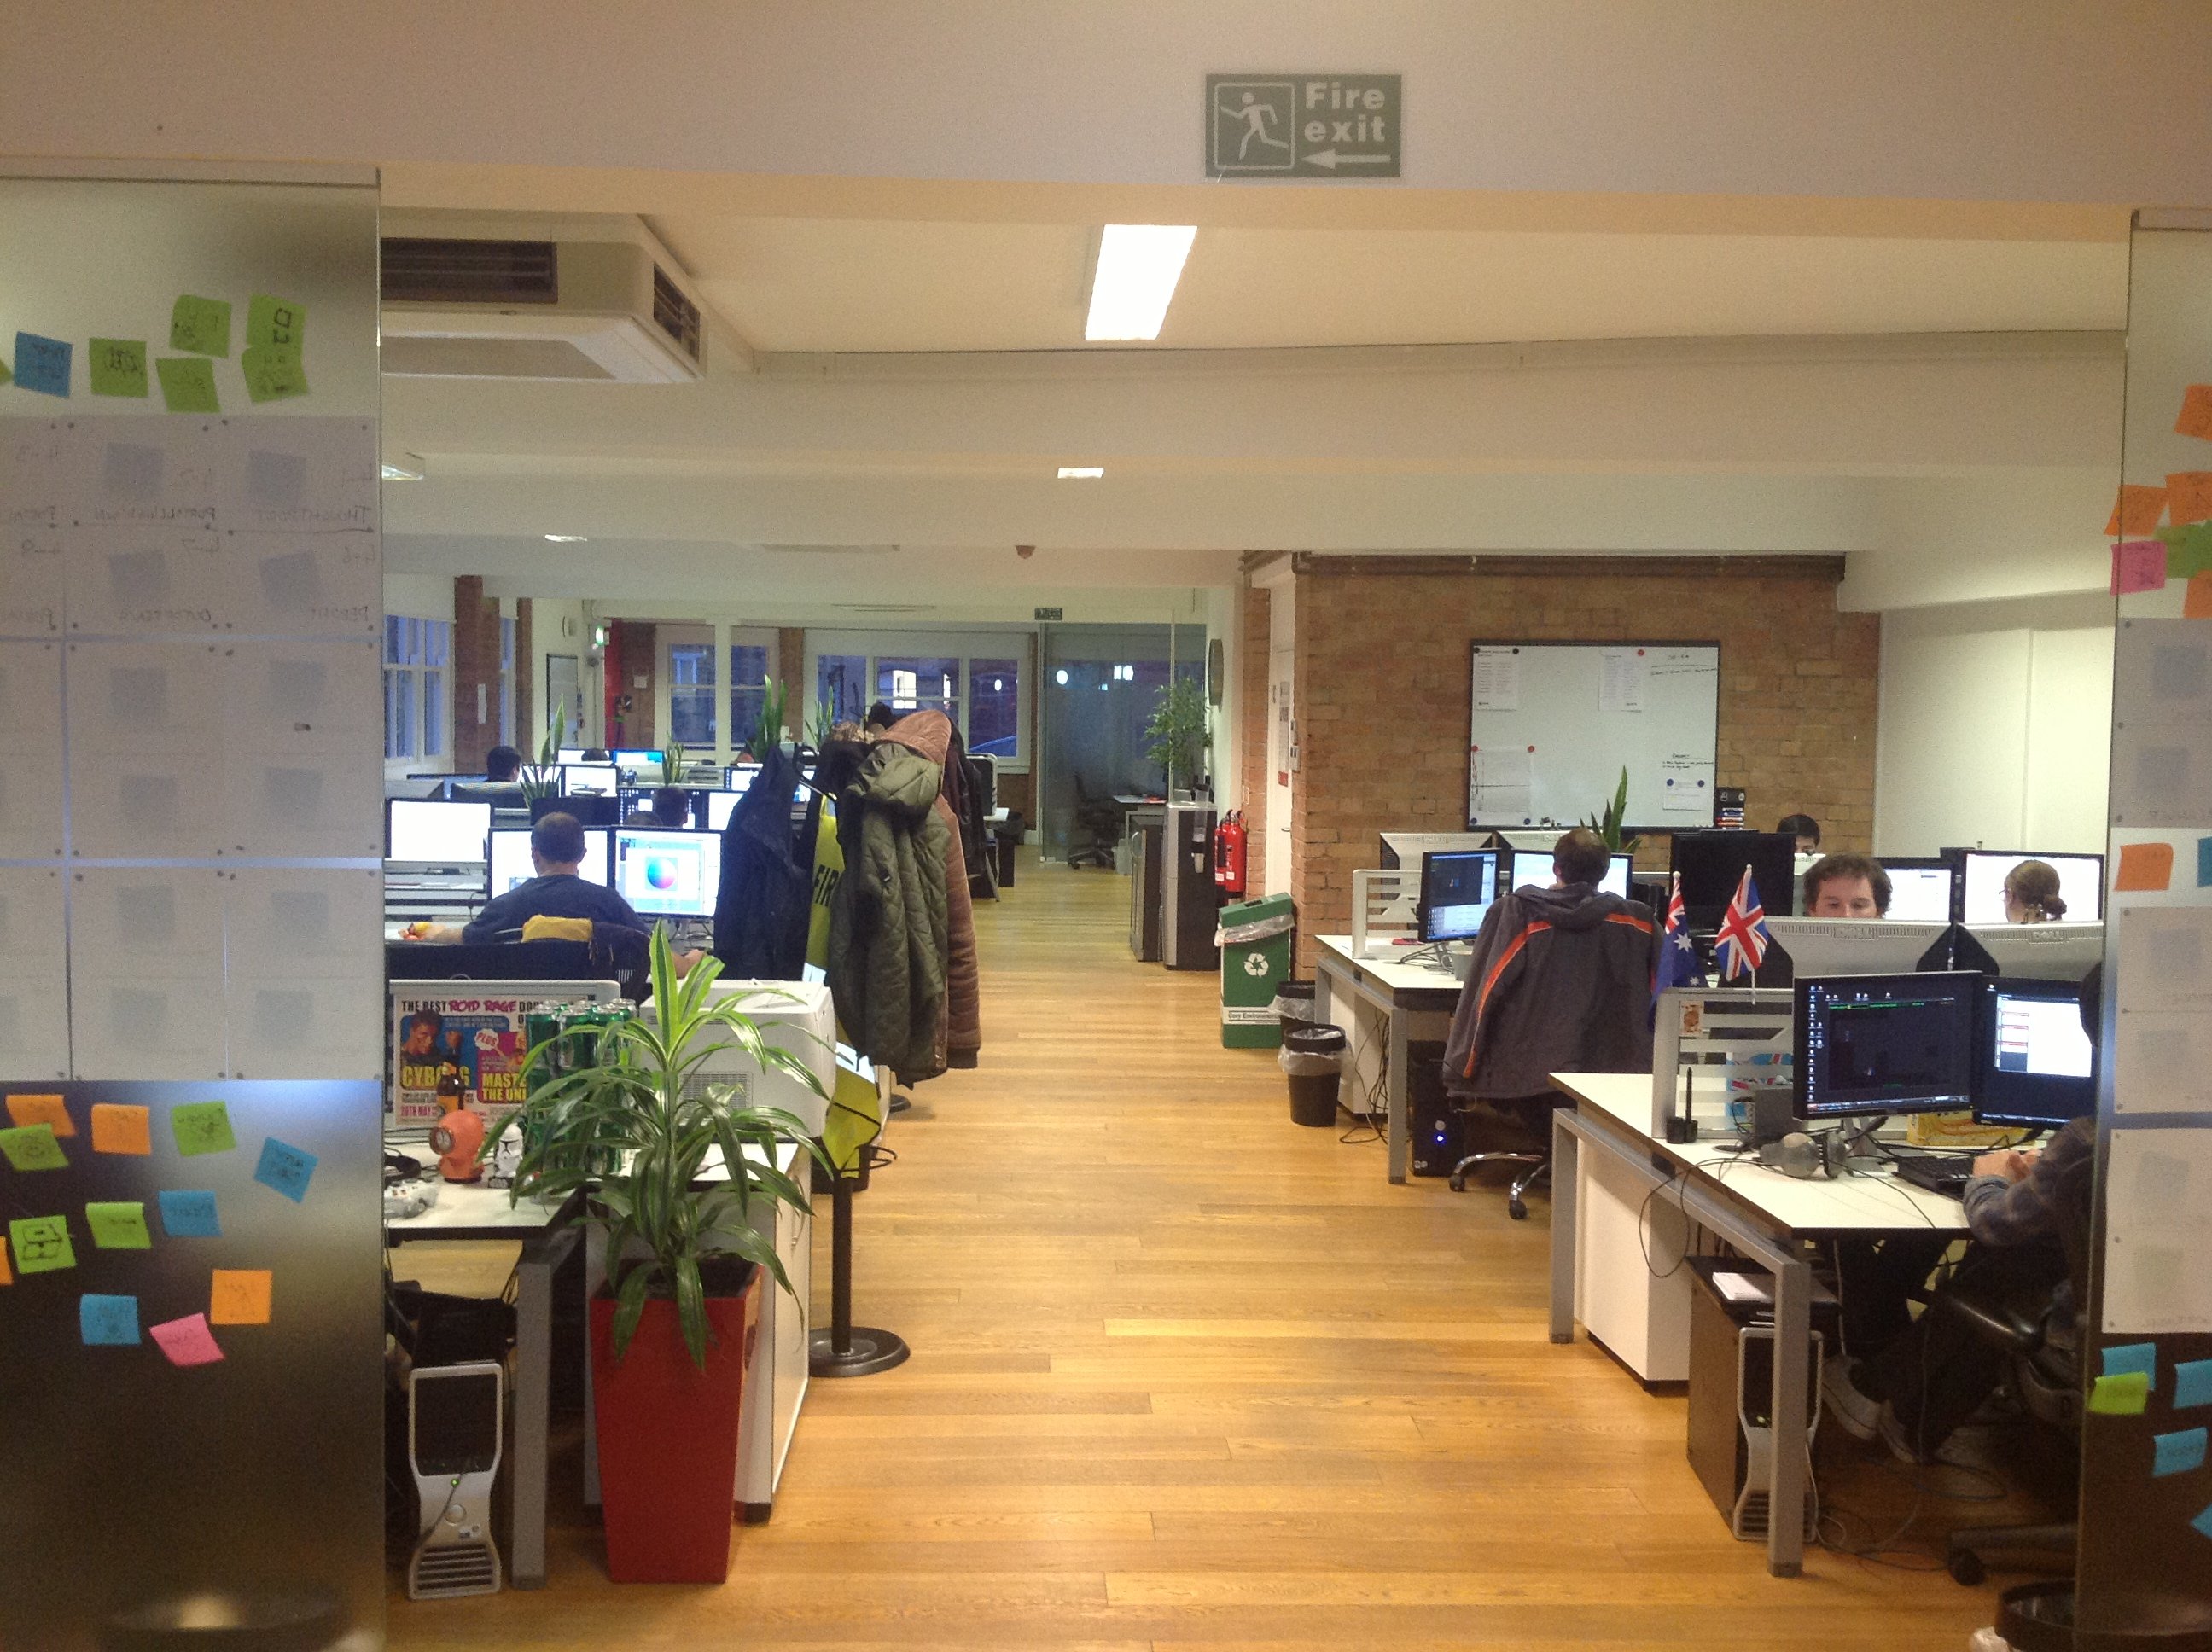 The central hive of activity that is Curve Studios in London.